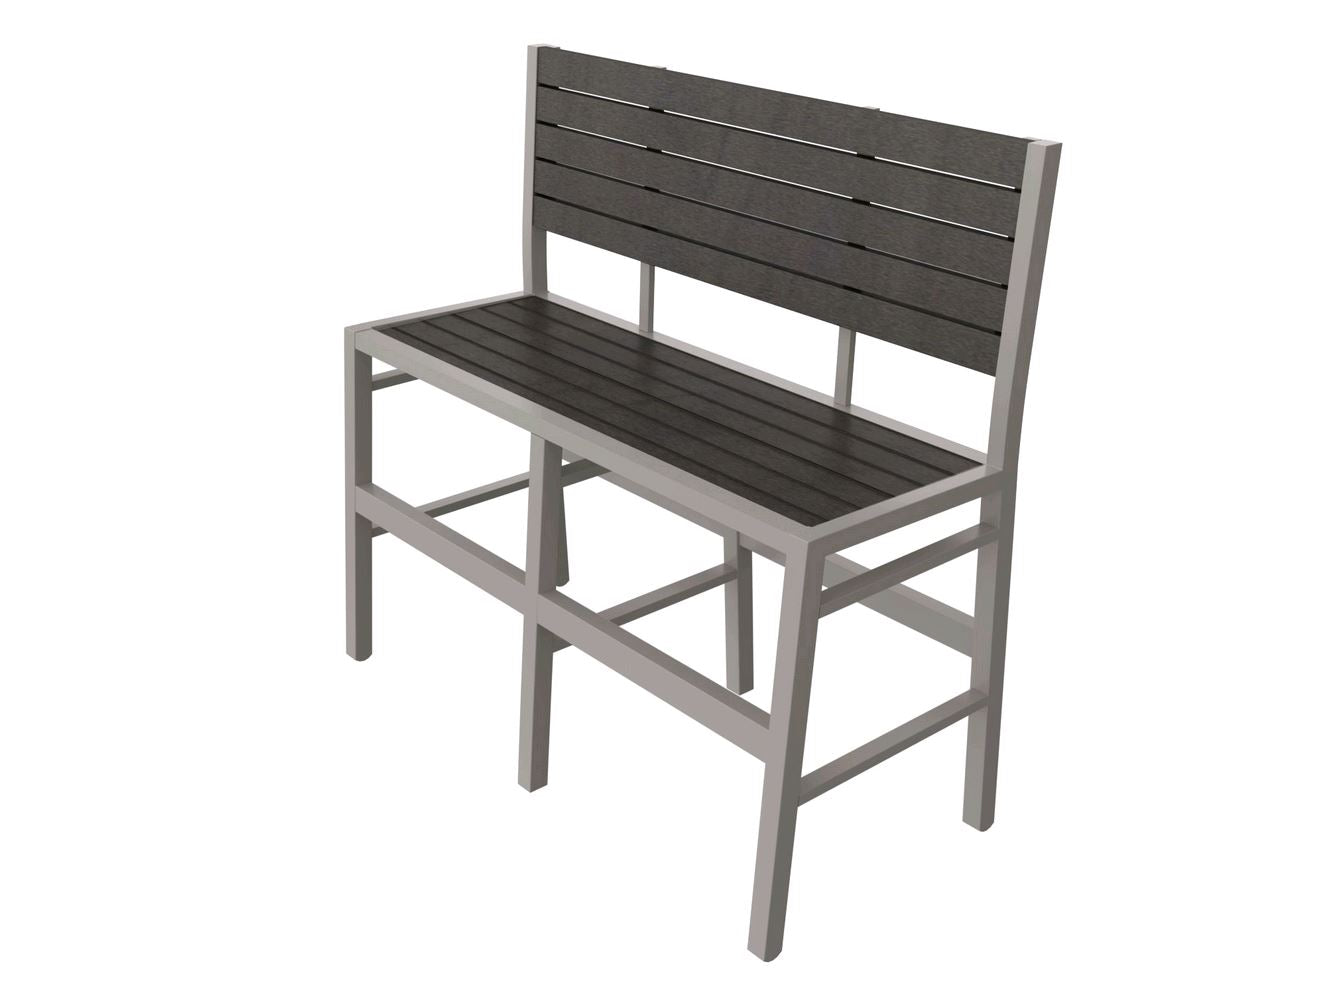 Tarrison Ace Bar Height Bench with Black frame and cocoa slats